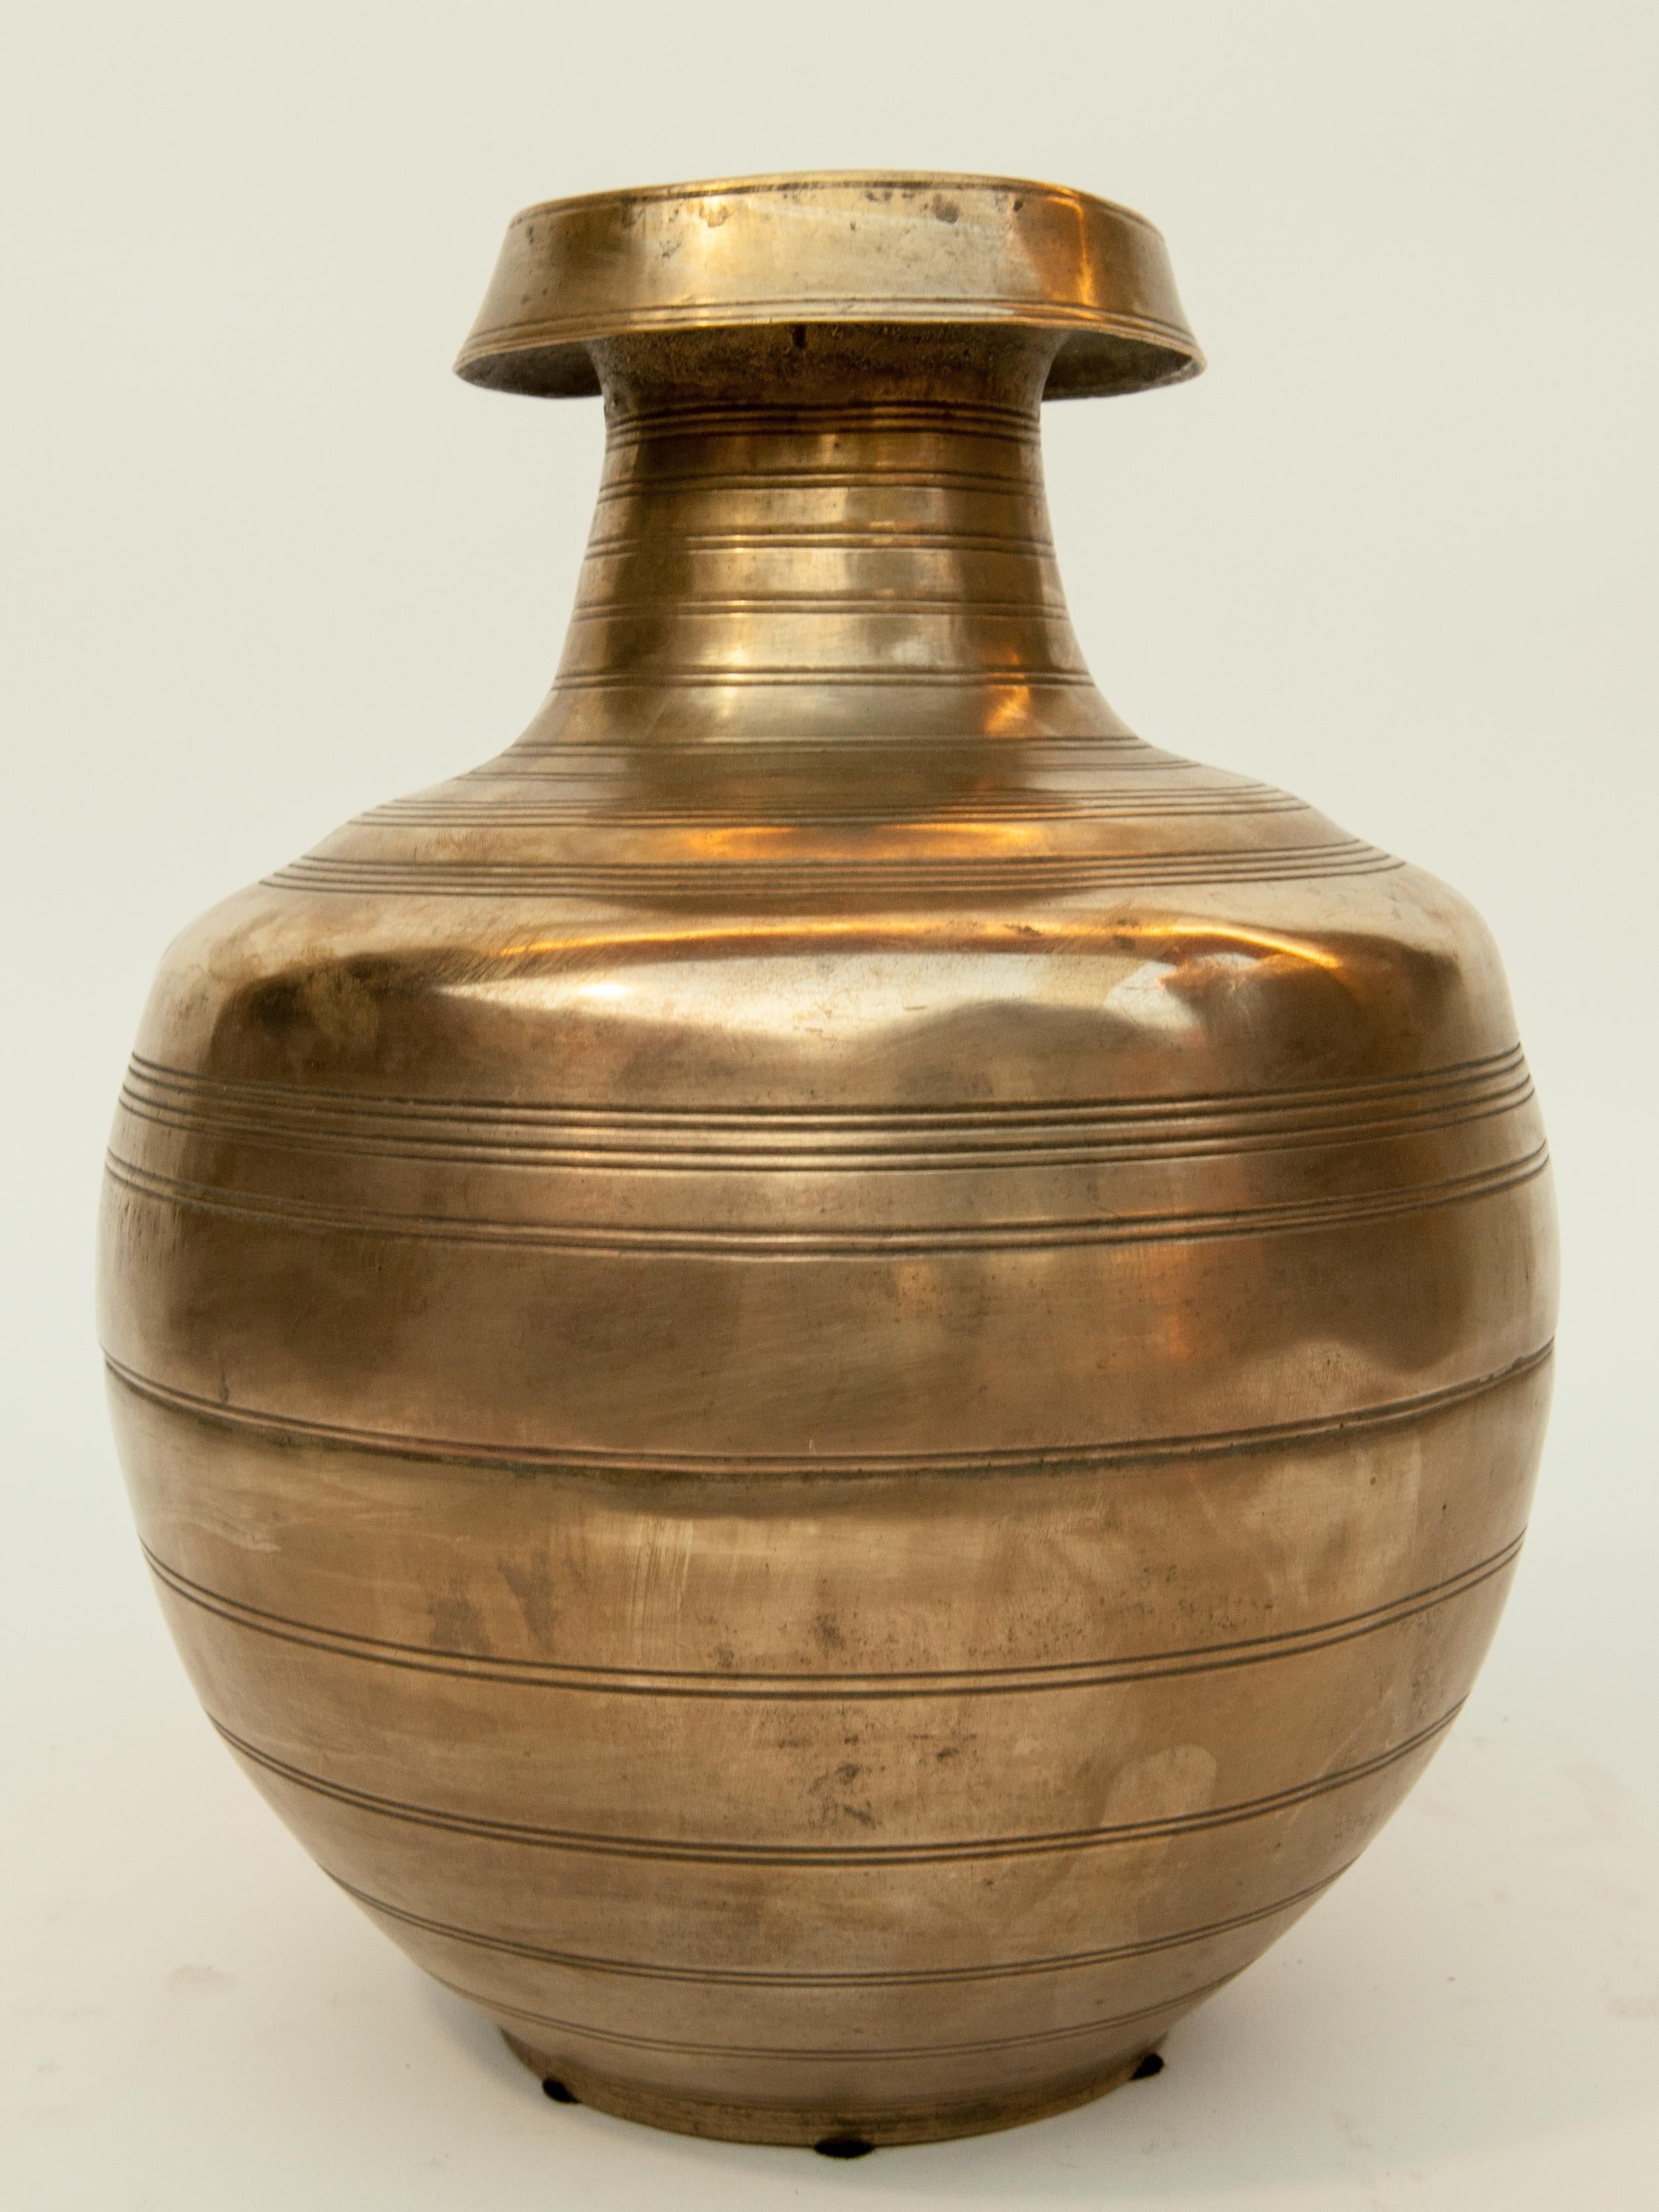 Vintage bronze water pot from Nepal, mid-20th century.
Offered by Bruce Hughes.
A beautifully balanced bronze pot from the Terai region of Nepal. With a natural aged patina, this pot was used in a Muslim household to collect and store water. In